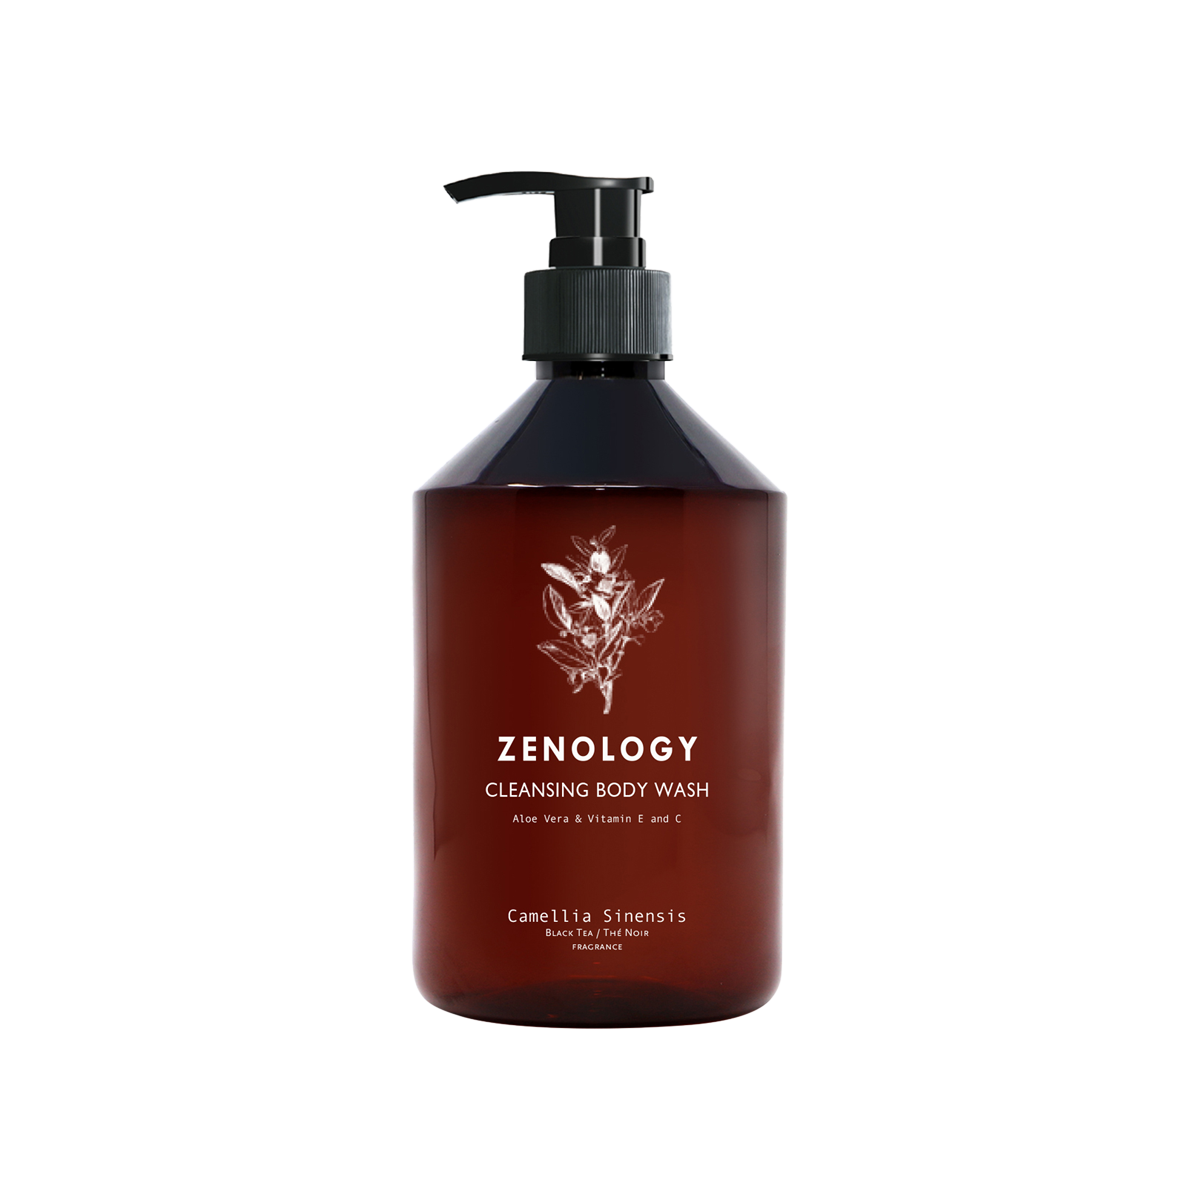 Zenology - Camellia Sinensis Cleansing Body Wash